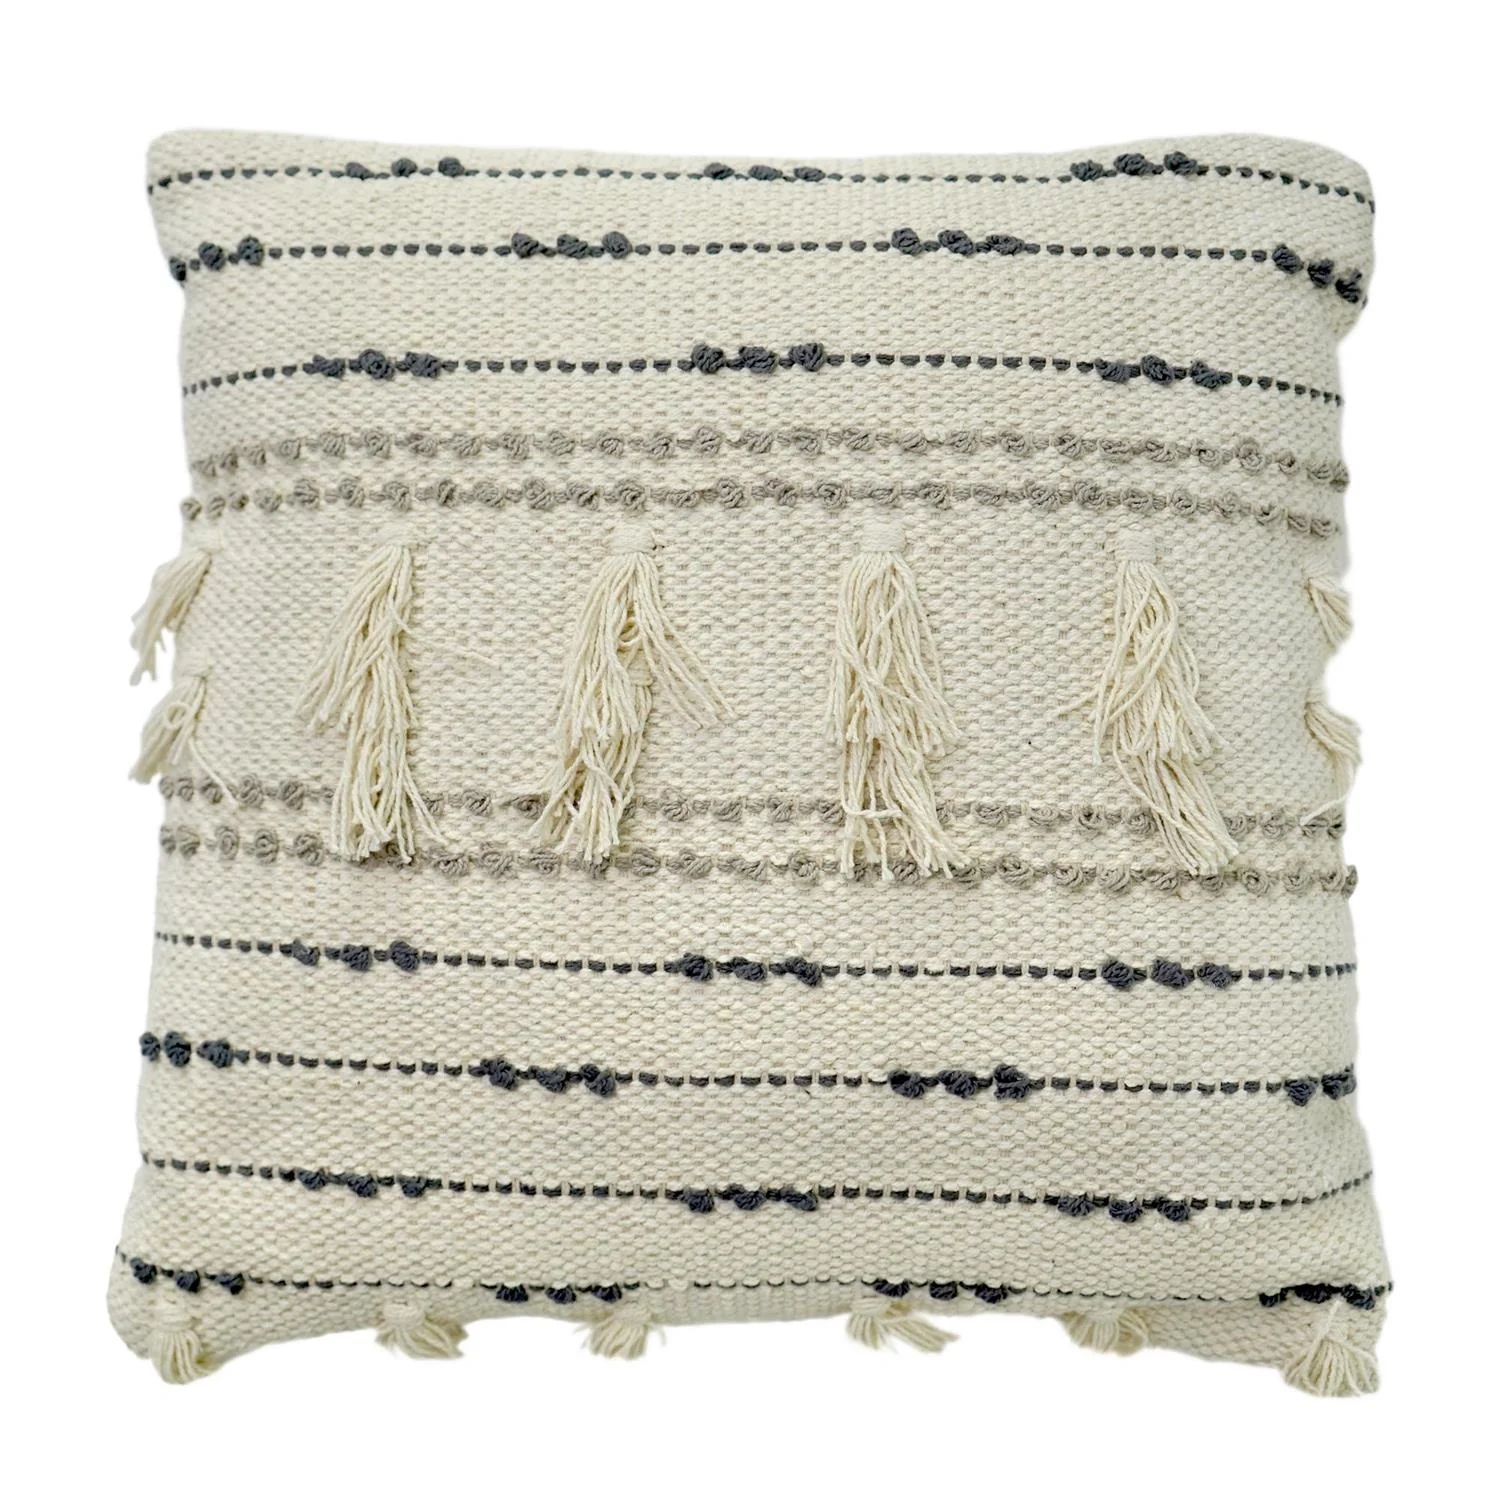 American Art Décor Hand-Woven Boho Moroccan Decorative Throw Pillow in Natural 17" x 17" Sized Lord  | Lord & Taylor